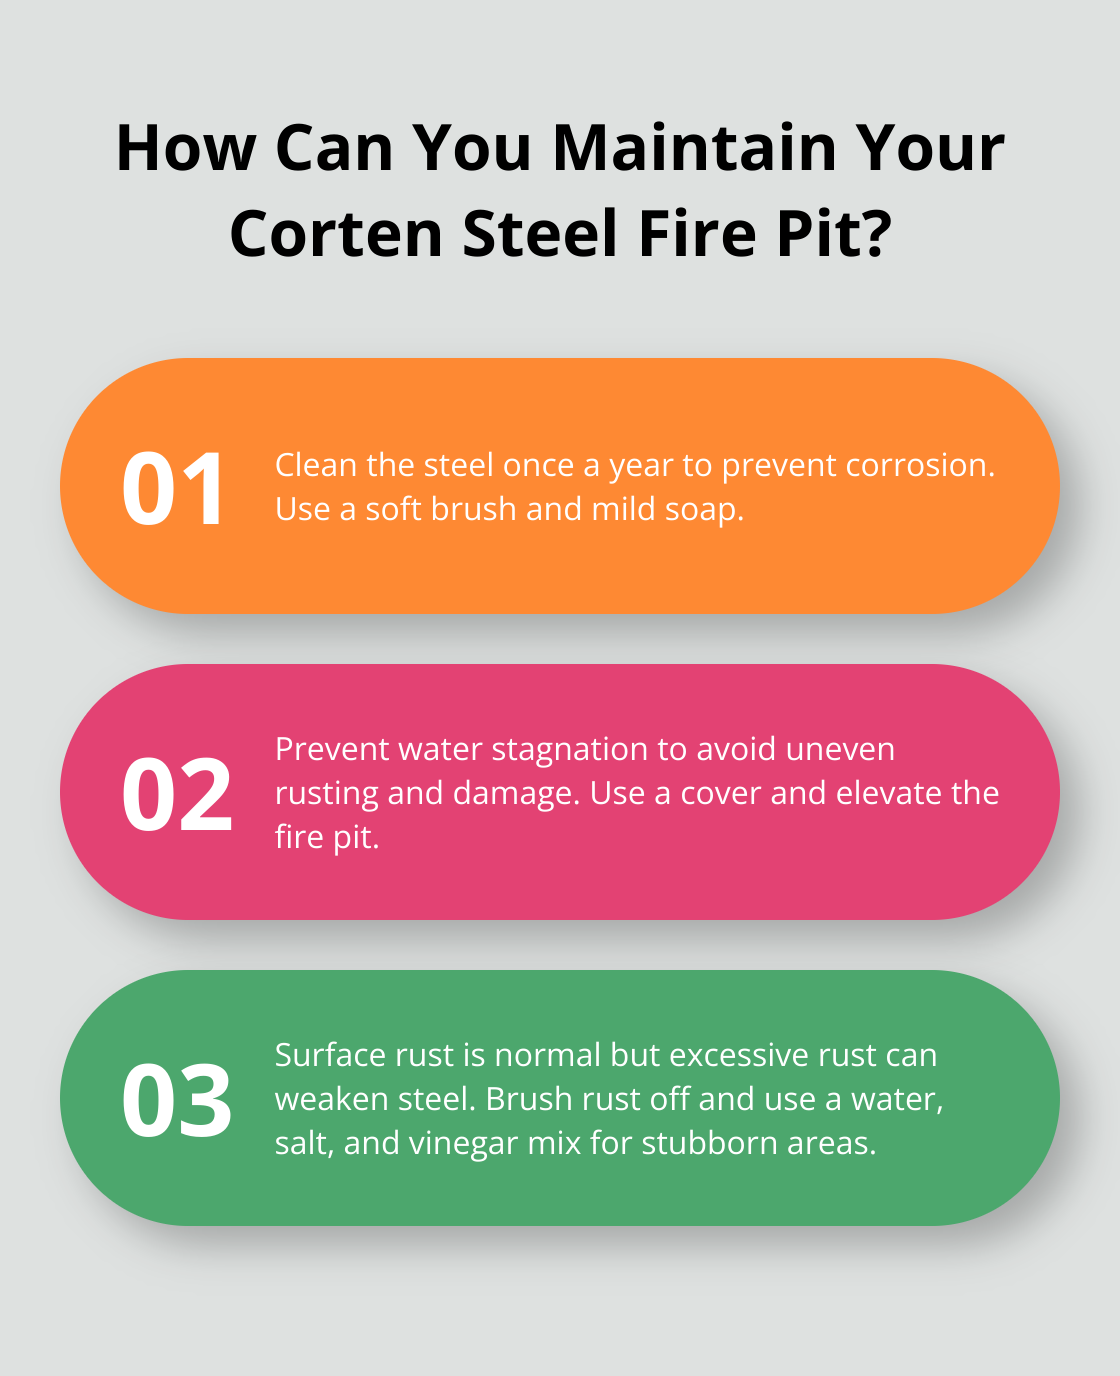 Fact - How Can You Maintain Your Corten Steel Fire Pit?